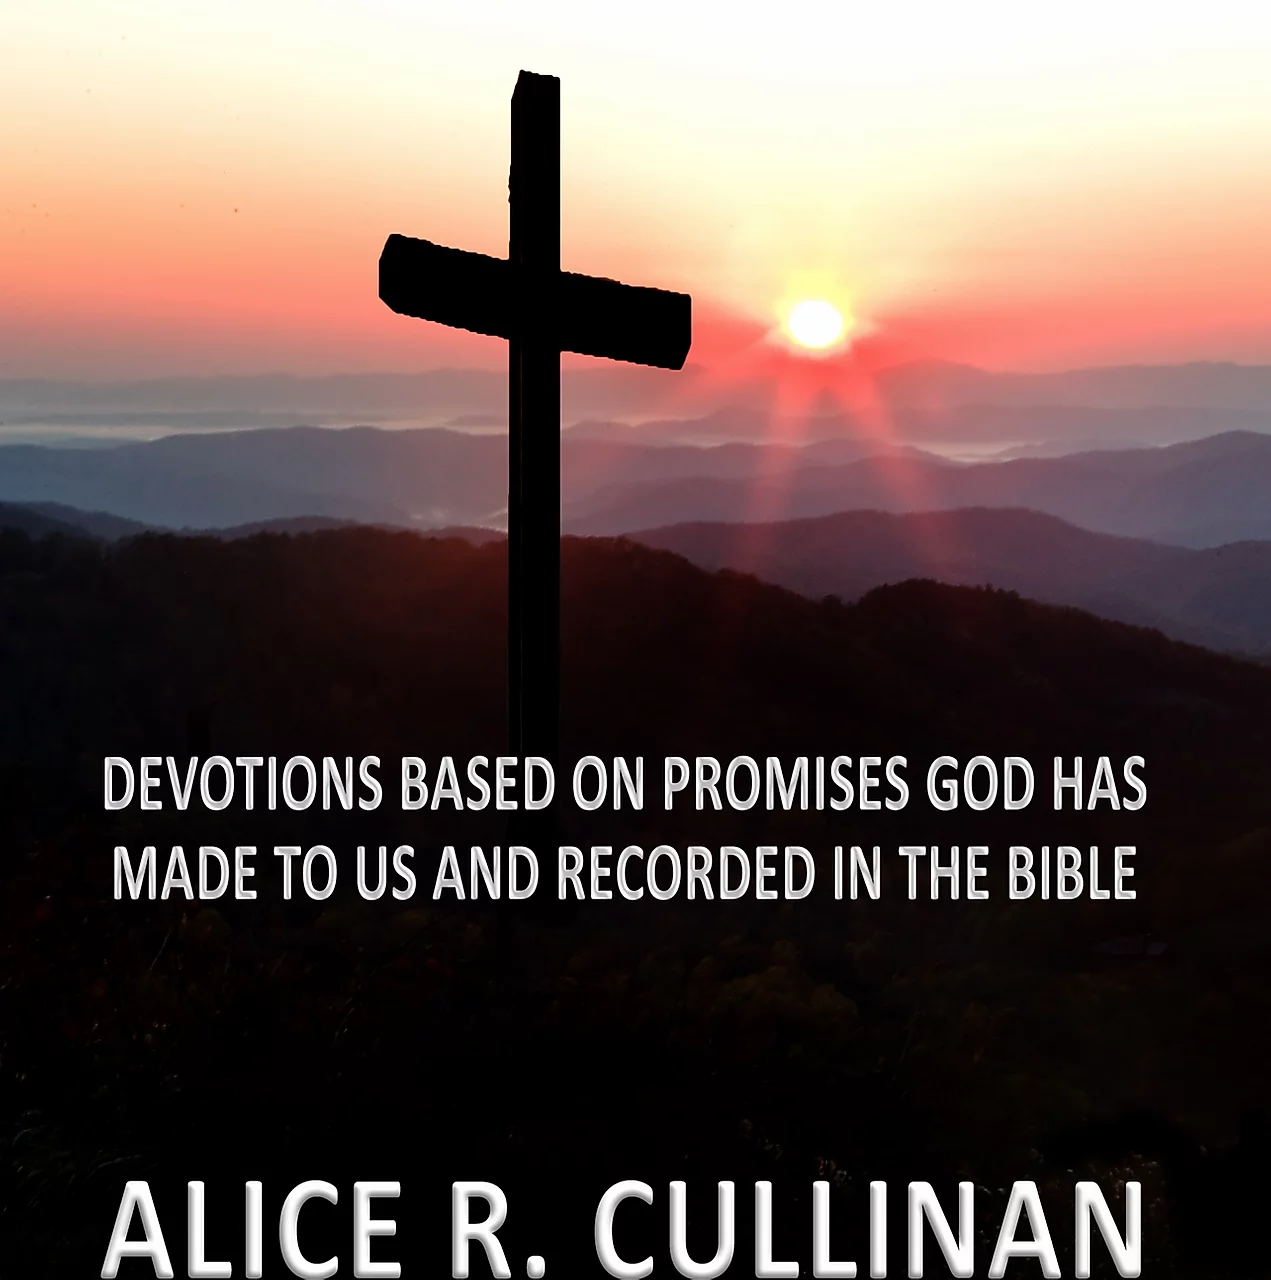 Cross overlooking the mountains at sunset. Devotions based on promises God has made to us and recorded in the Bible. Alice R. Cullinan